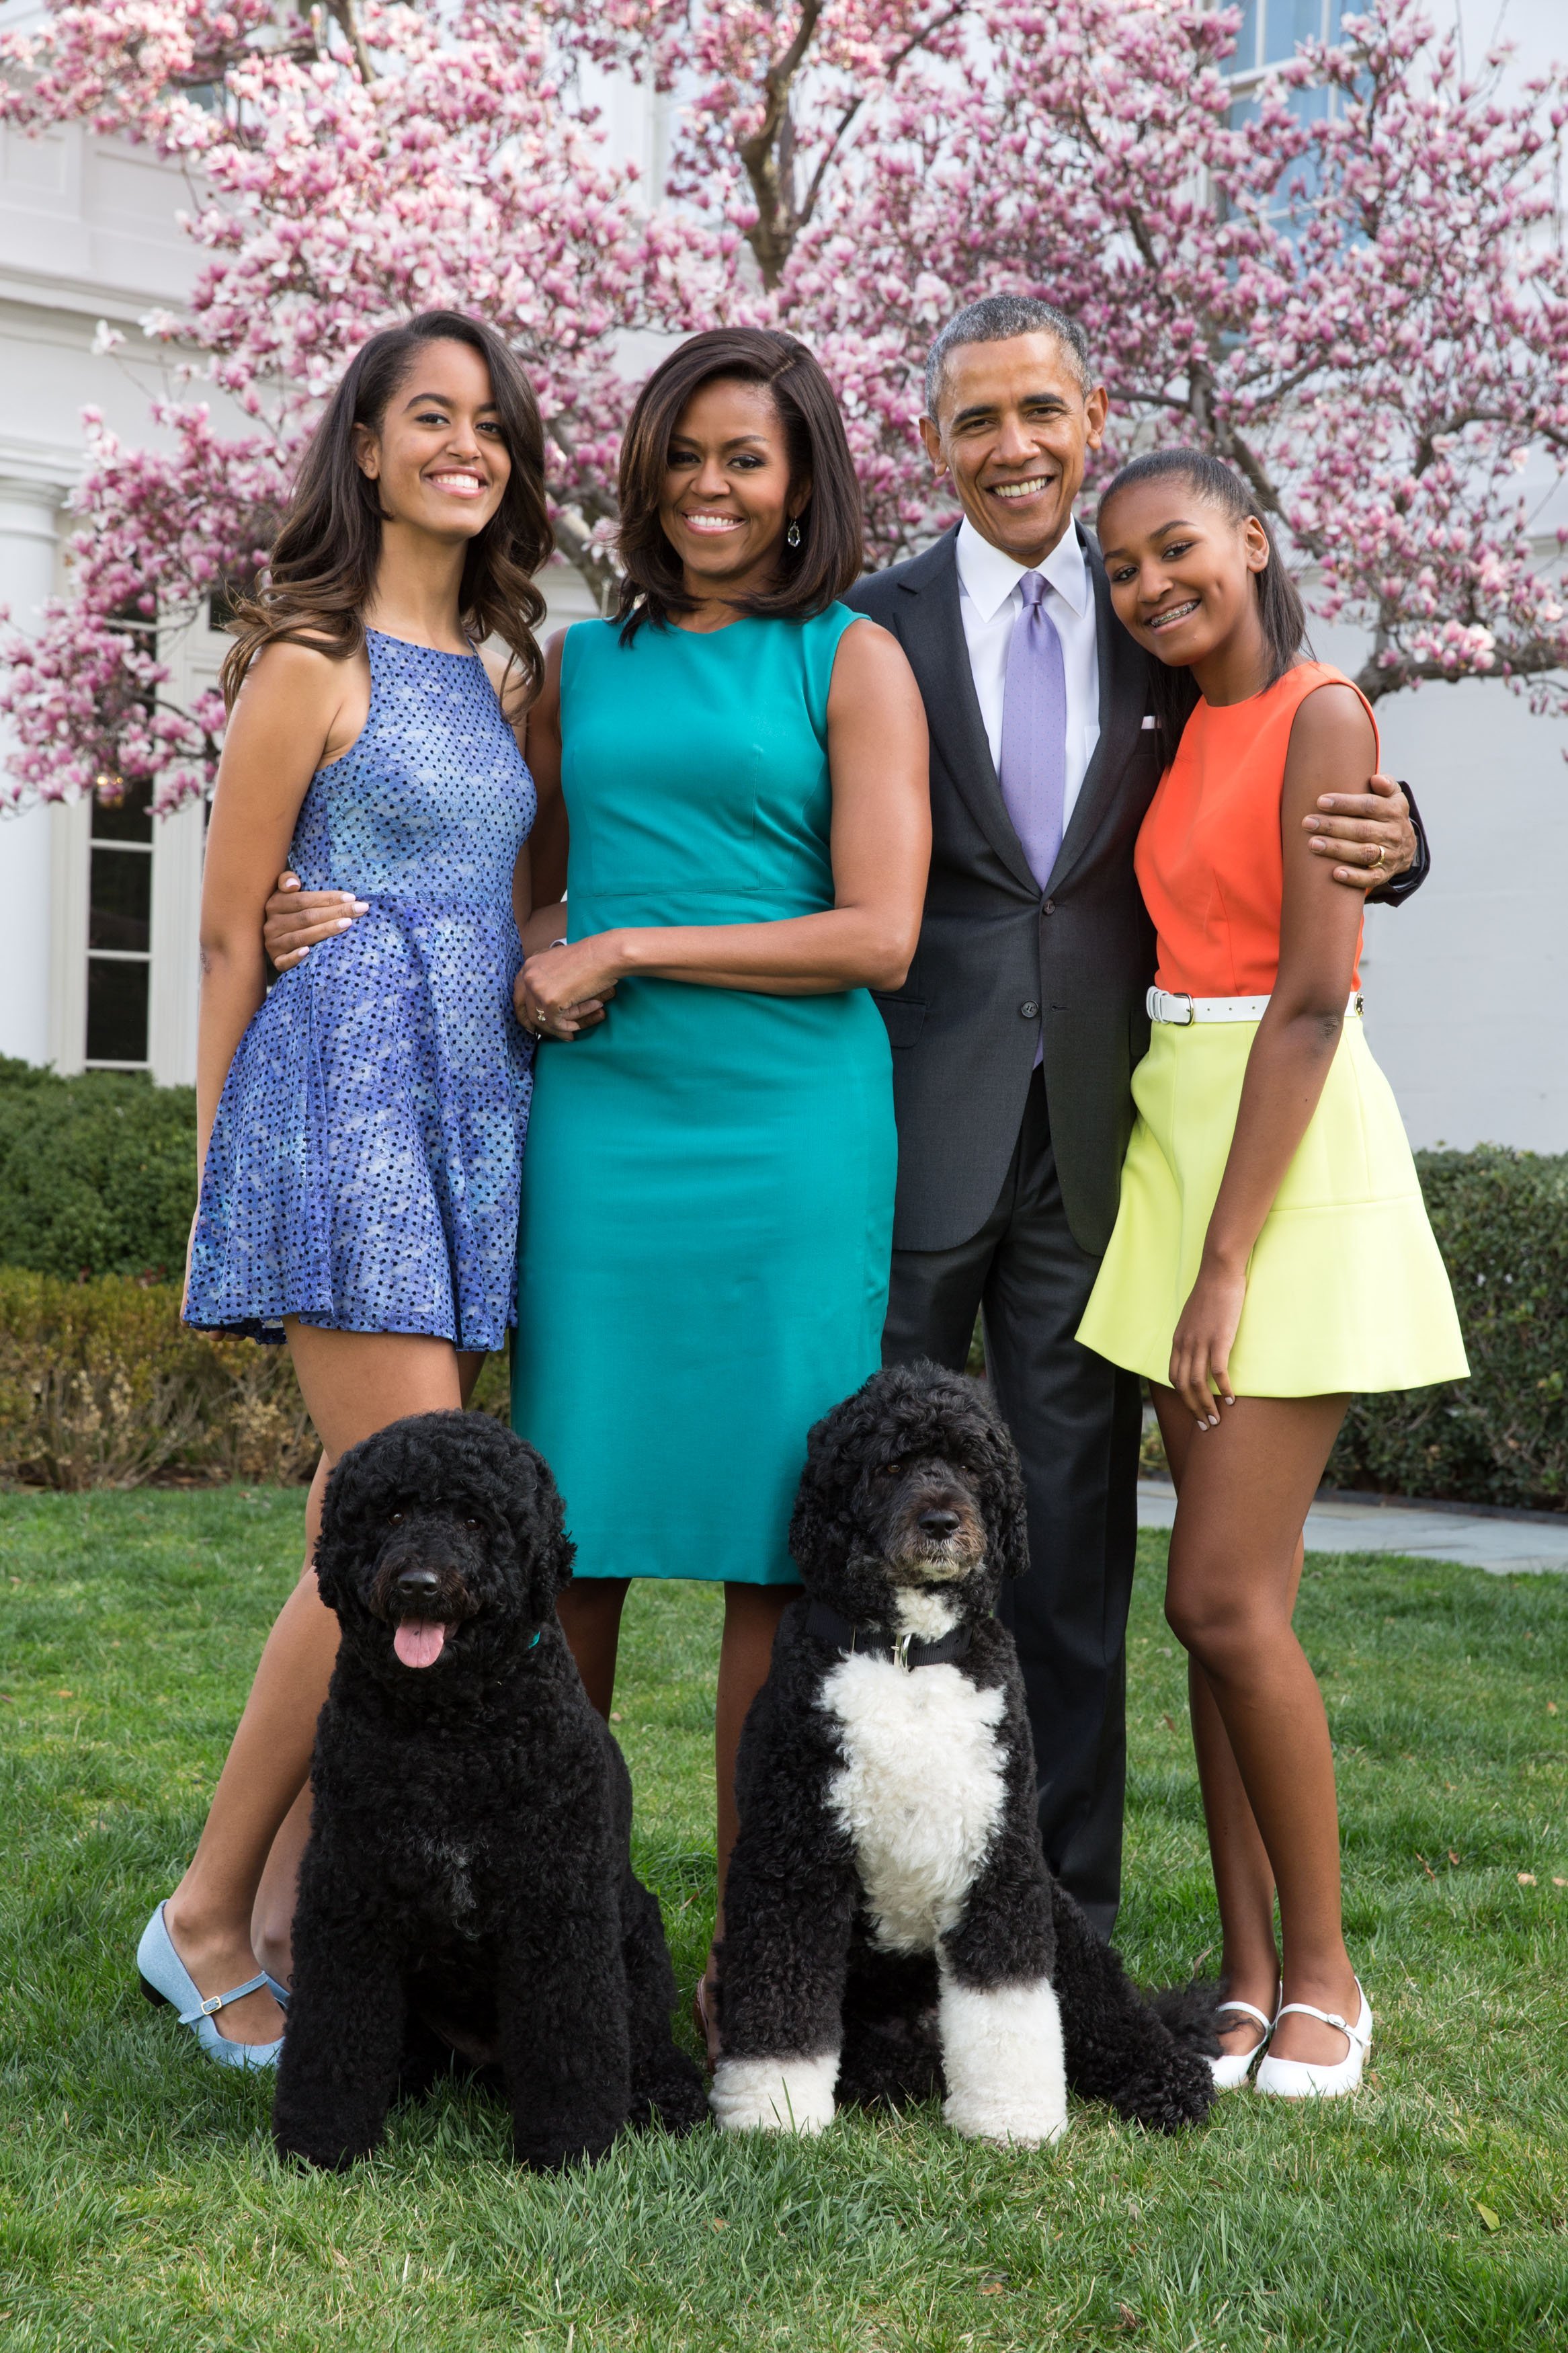 Barack Obama, Michelle, Malia & Sasha pose for a family portrait with their pets Bo and Sunny at the White House on Apr. 5, 2015 in Washington, DC. | Photo: Getty Images.